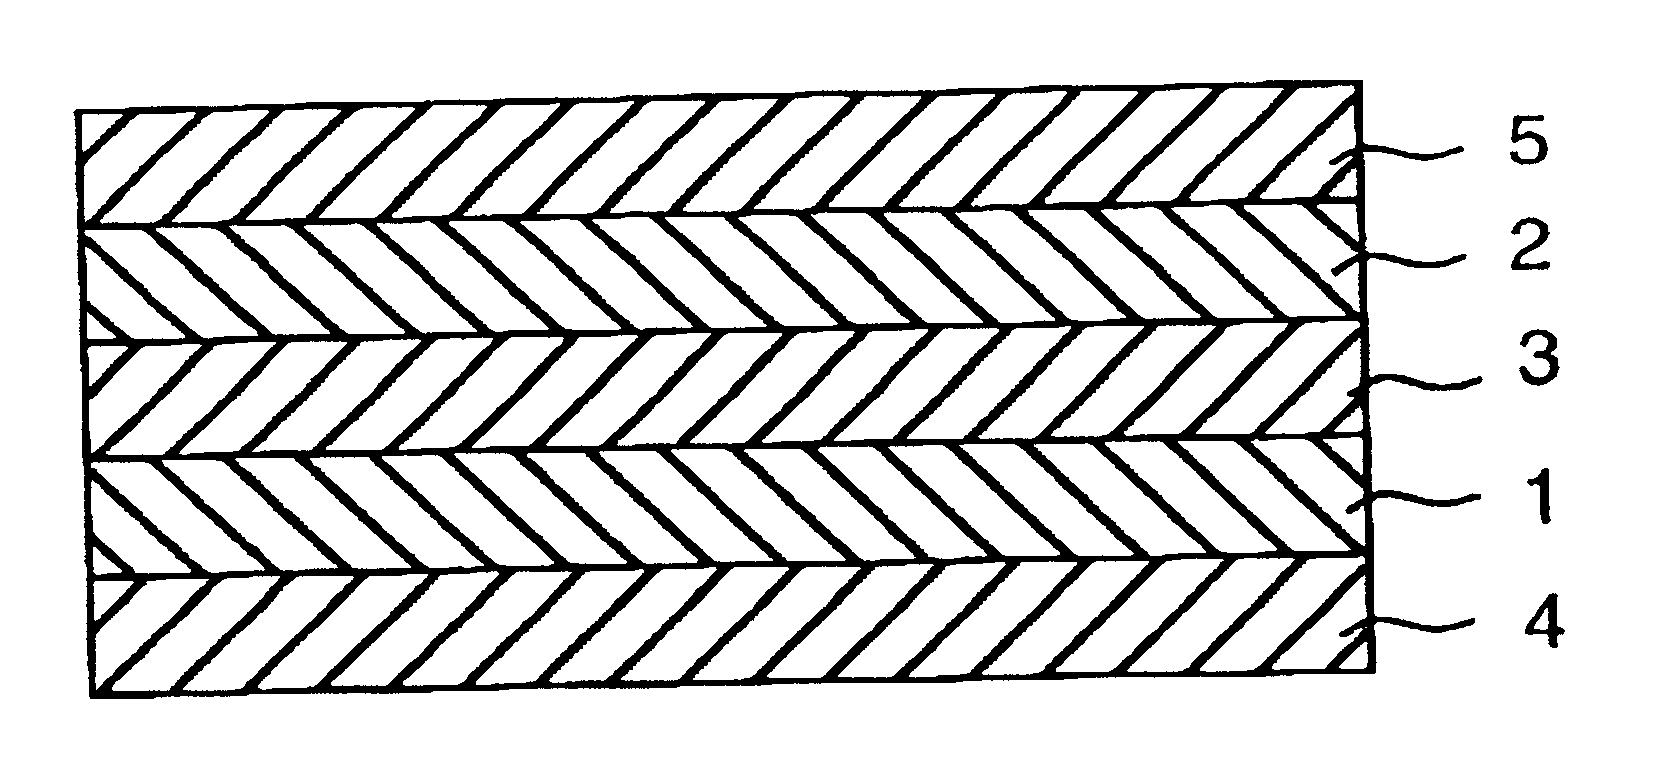 Radiation-curable thermal printing ink and ink ribbons and methods of making, using and printing using the same